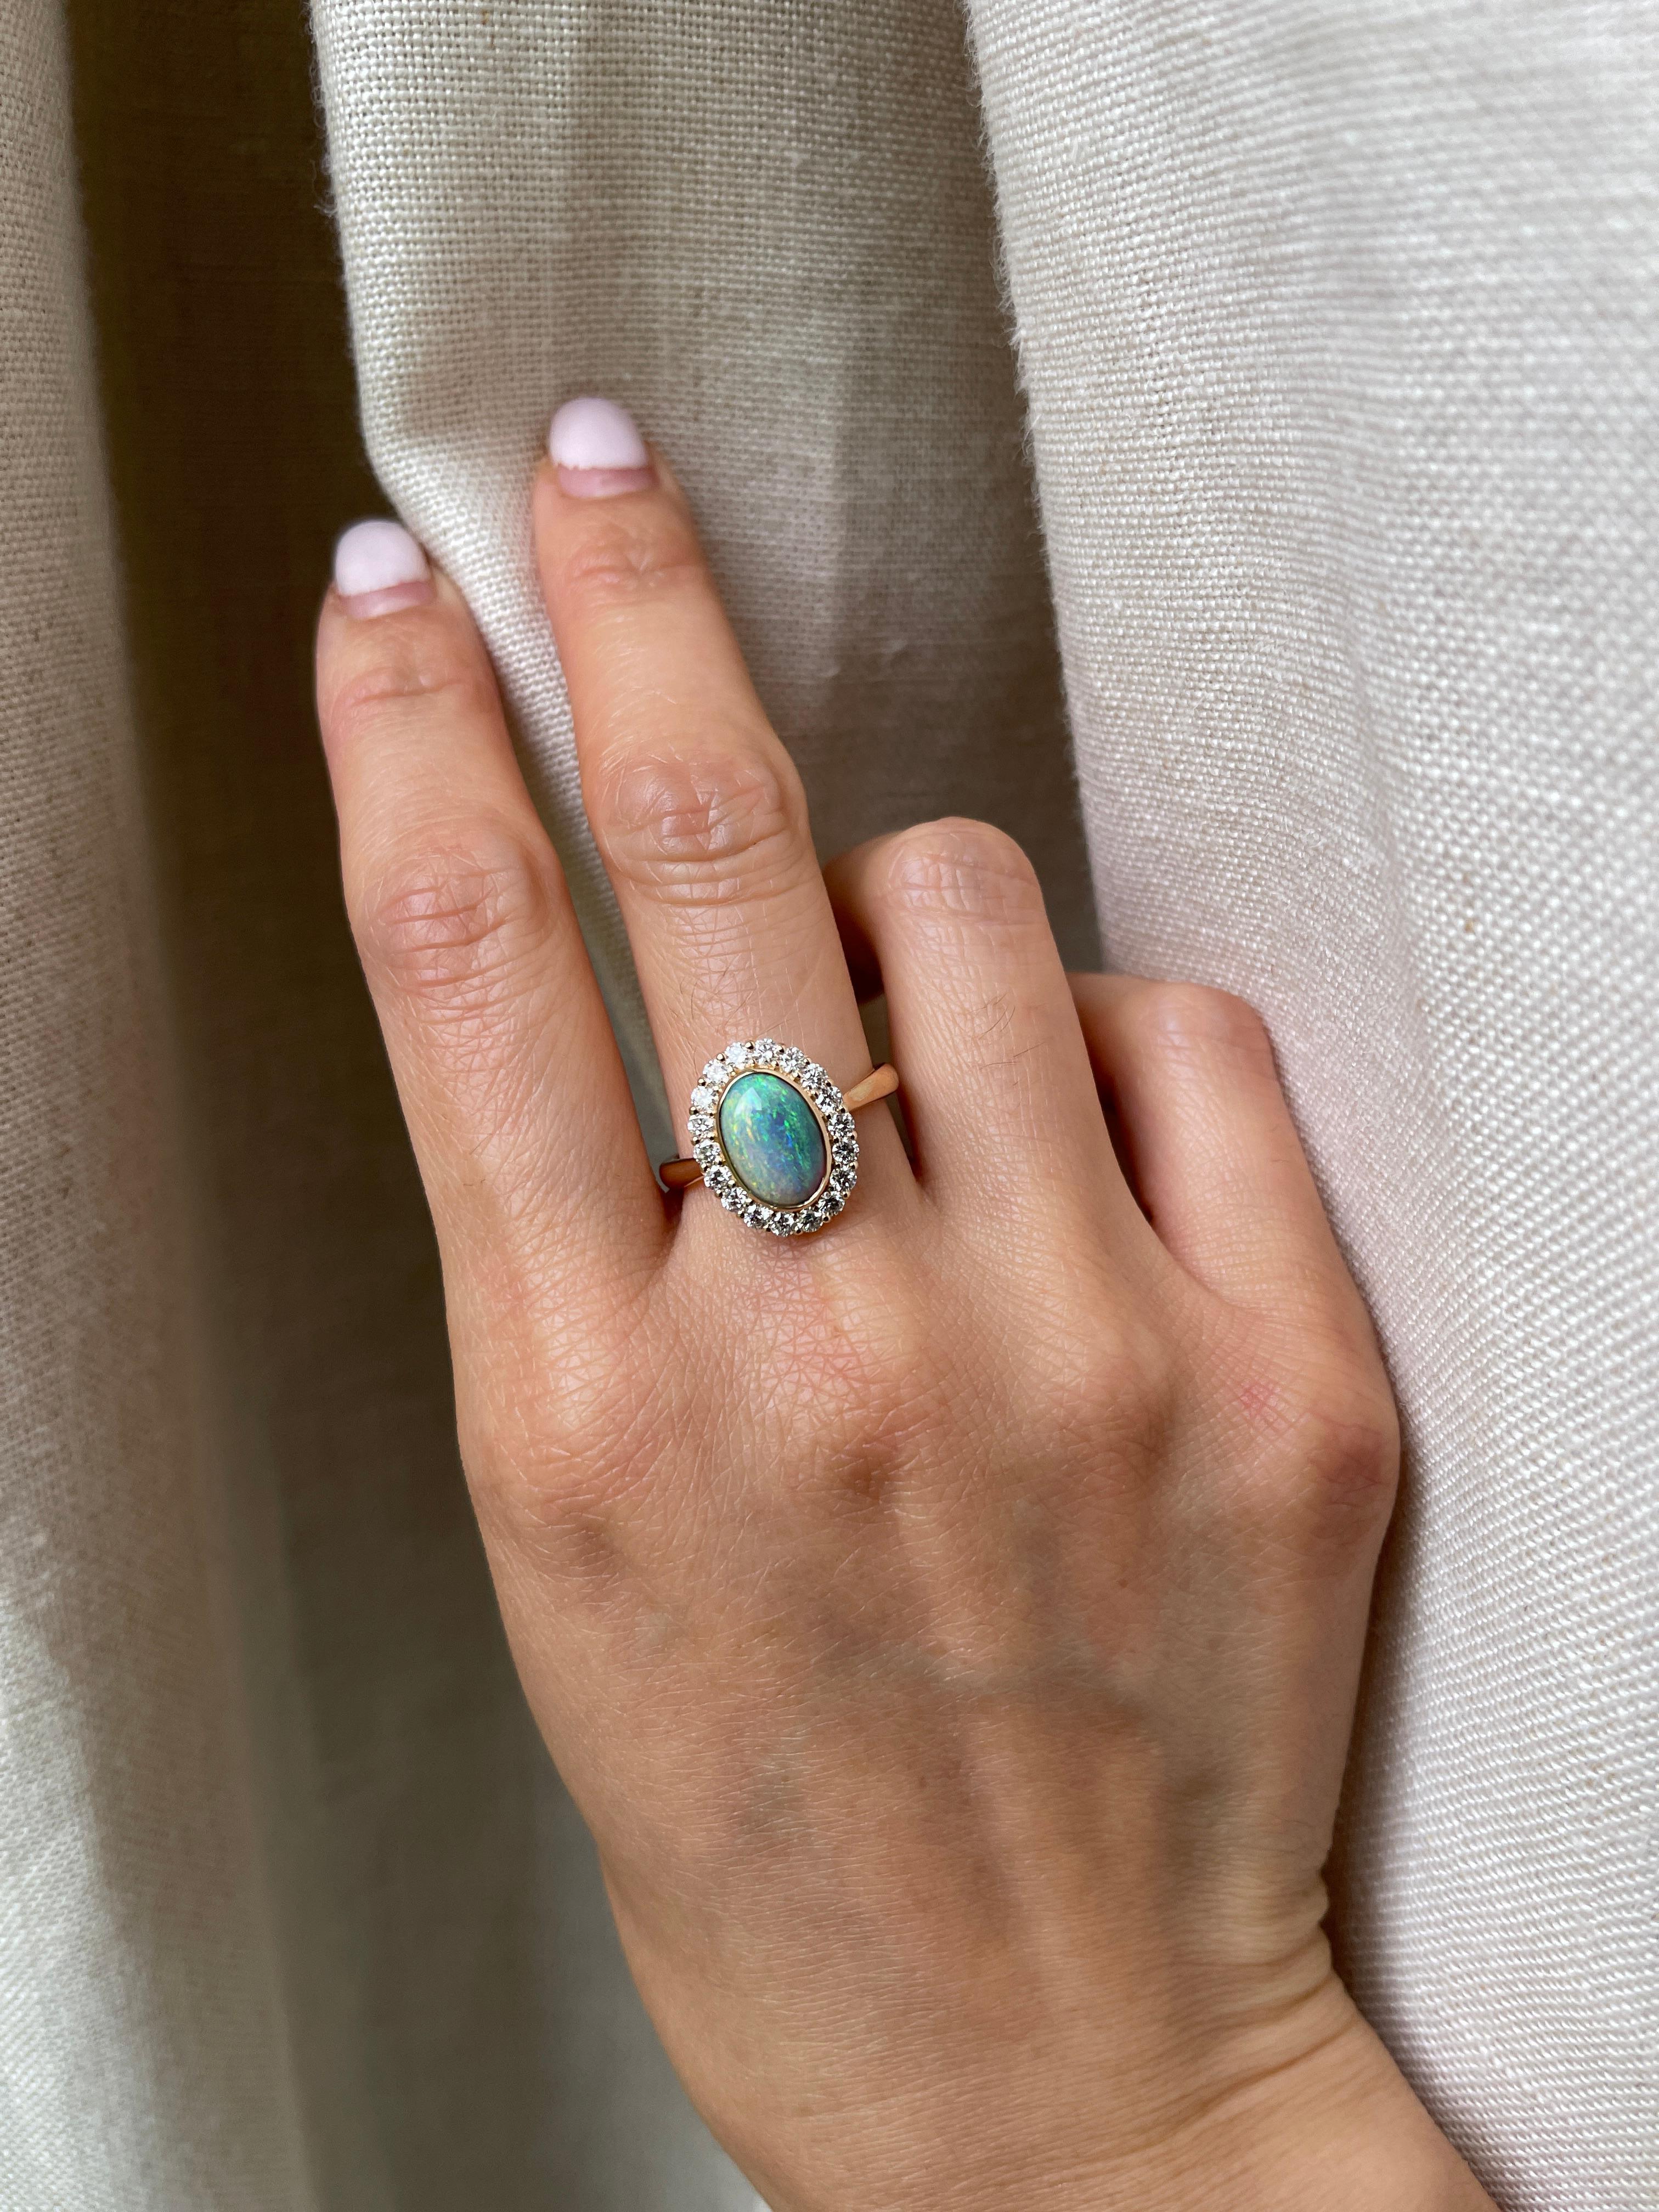 Oval Australian opal set on basket-like cluster design.  

Metal: 18k Yellow Gold
Stone: Australian Opal 
Stone Shape: Oval
Stone Weight: 1.66 Carat
Accent Stone: Natural Diamonds
Diamond Color and Clarity: G+ VS
Diamond Weight: 0.55 Total Carat